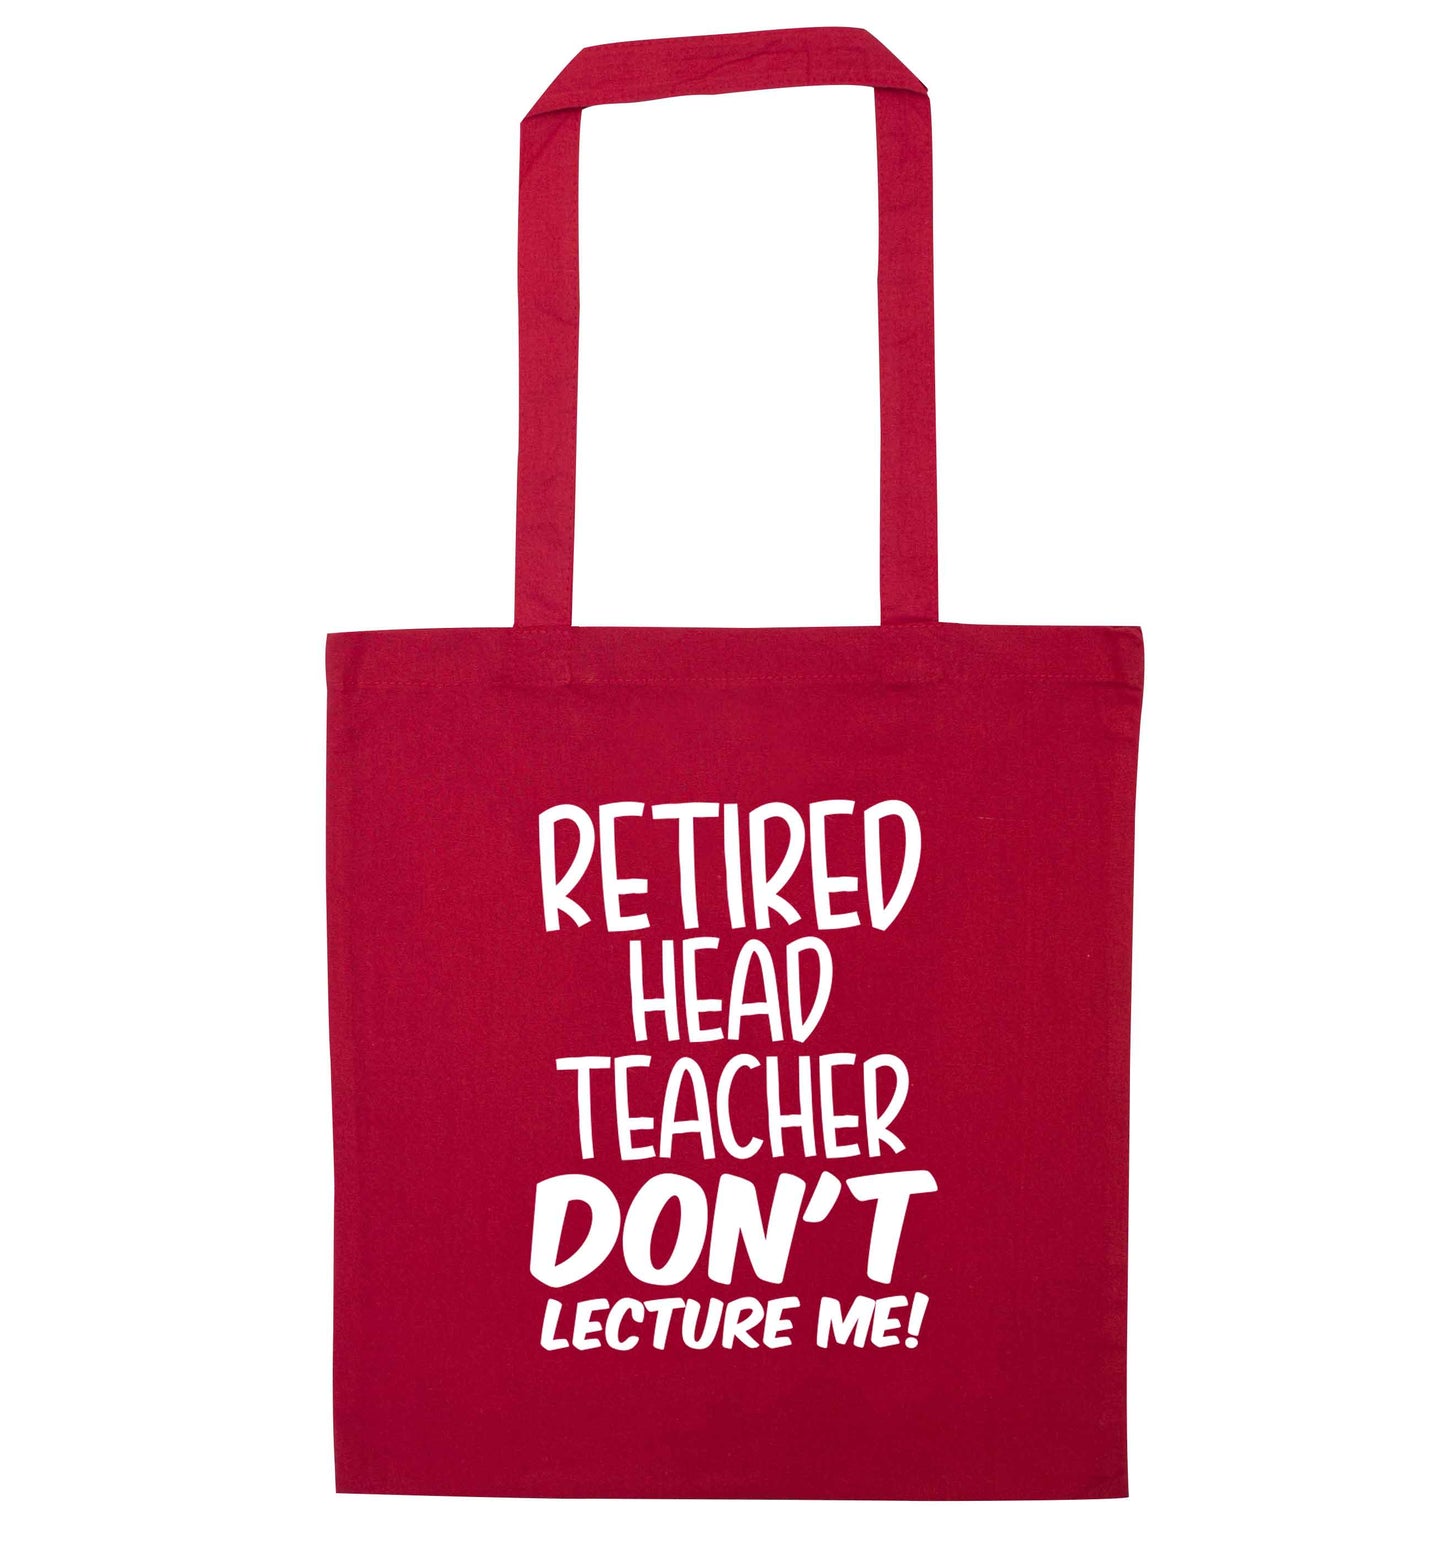 Retired head teacher don't lecture me! red tote bag